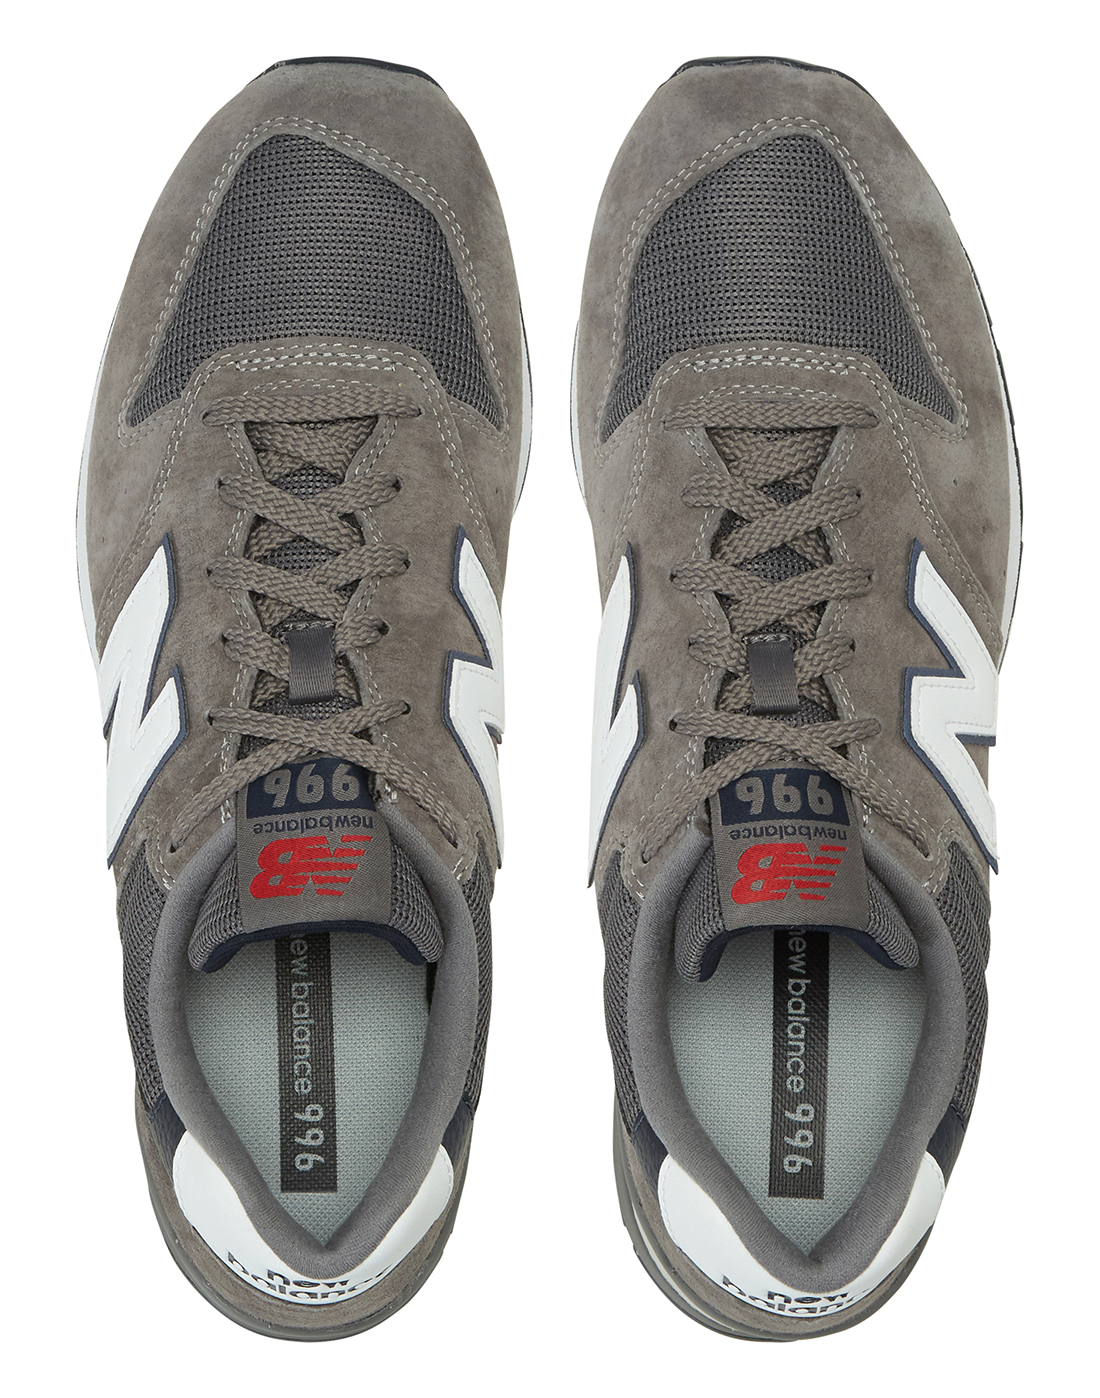 New Balance Mens 996 Trainers - Grey | Life Style Sports IE